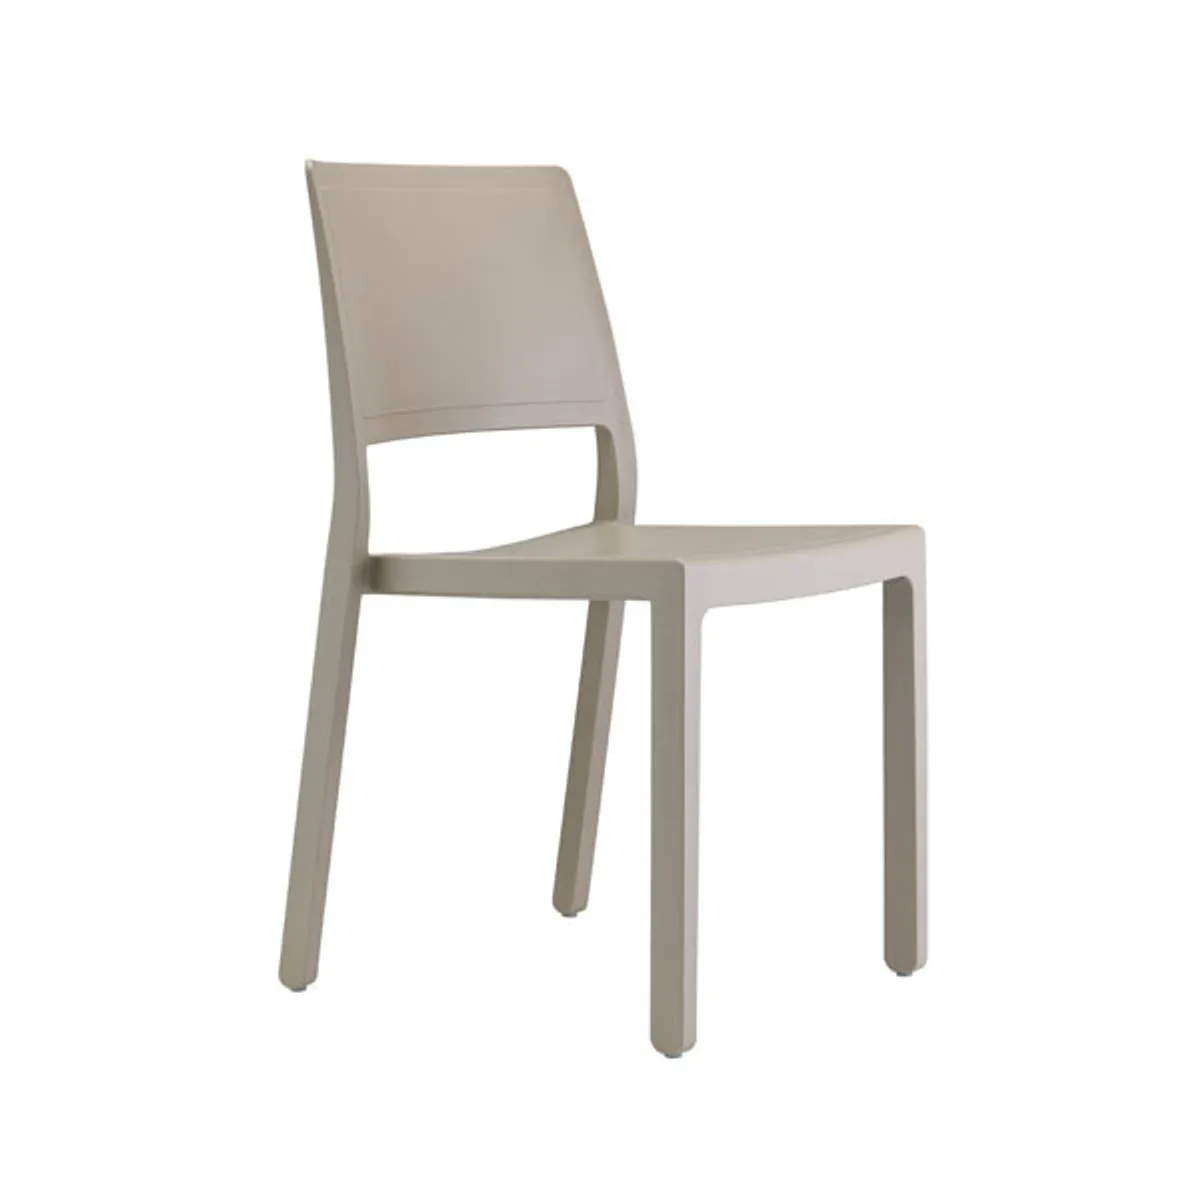 Remi side chair 3 Inside Out Contracts